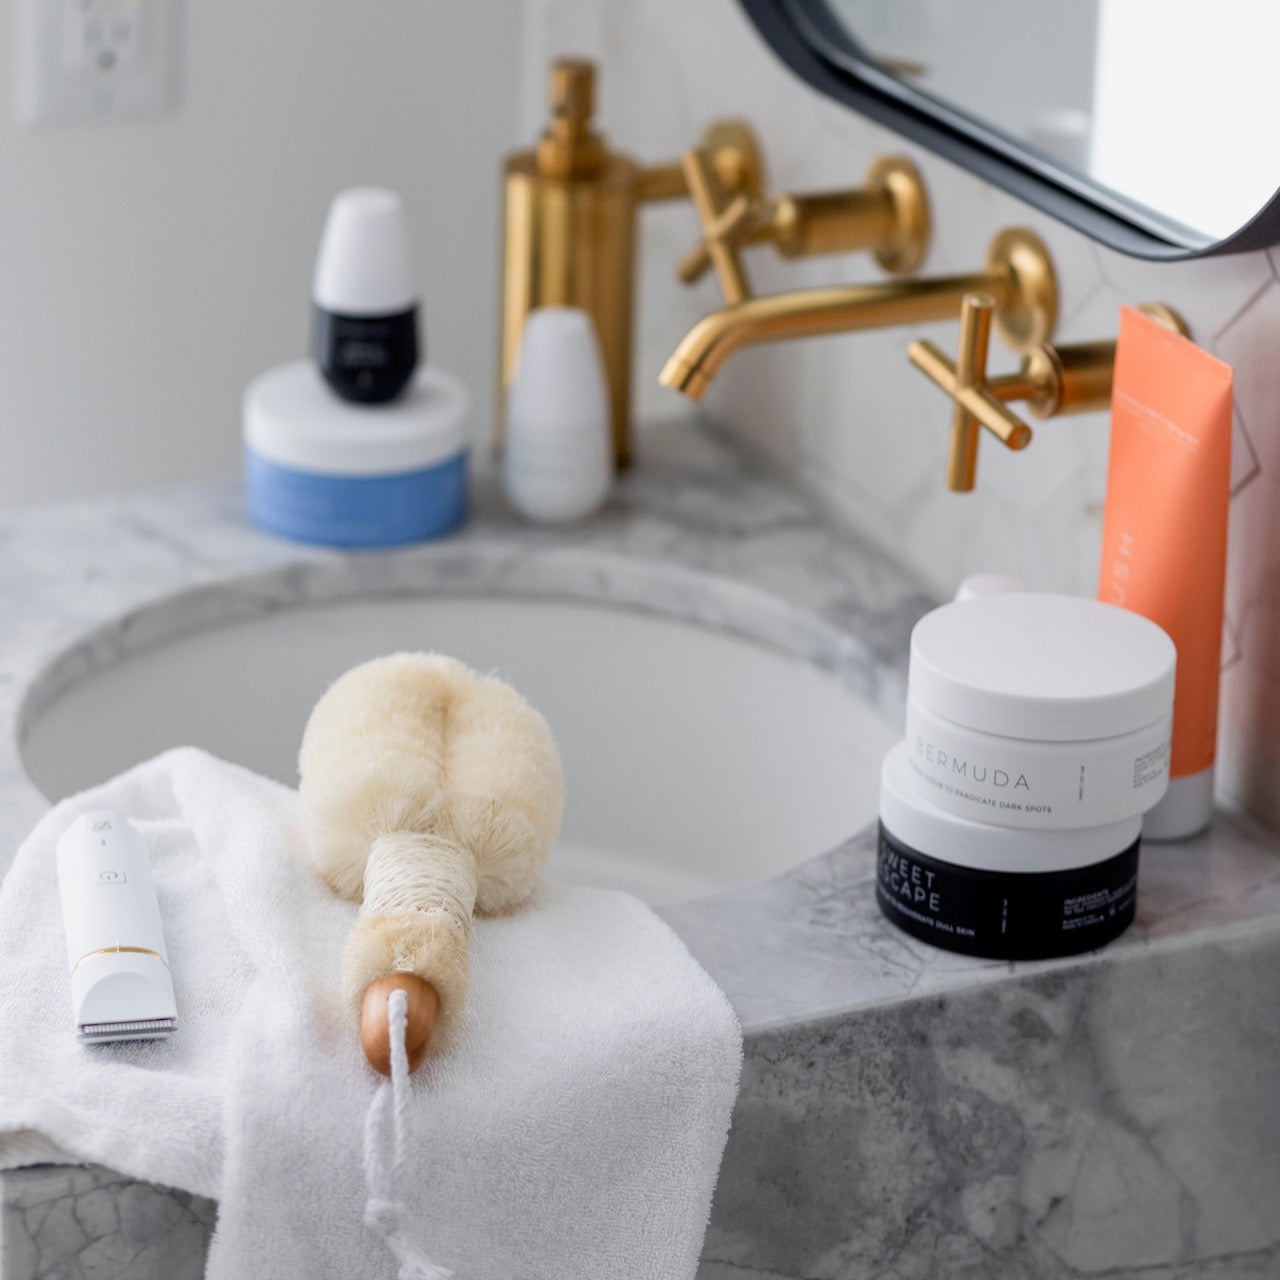 A selection of skincare products from Bushbalm along with its dry brush and trimmer on a bathroom counter.